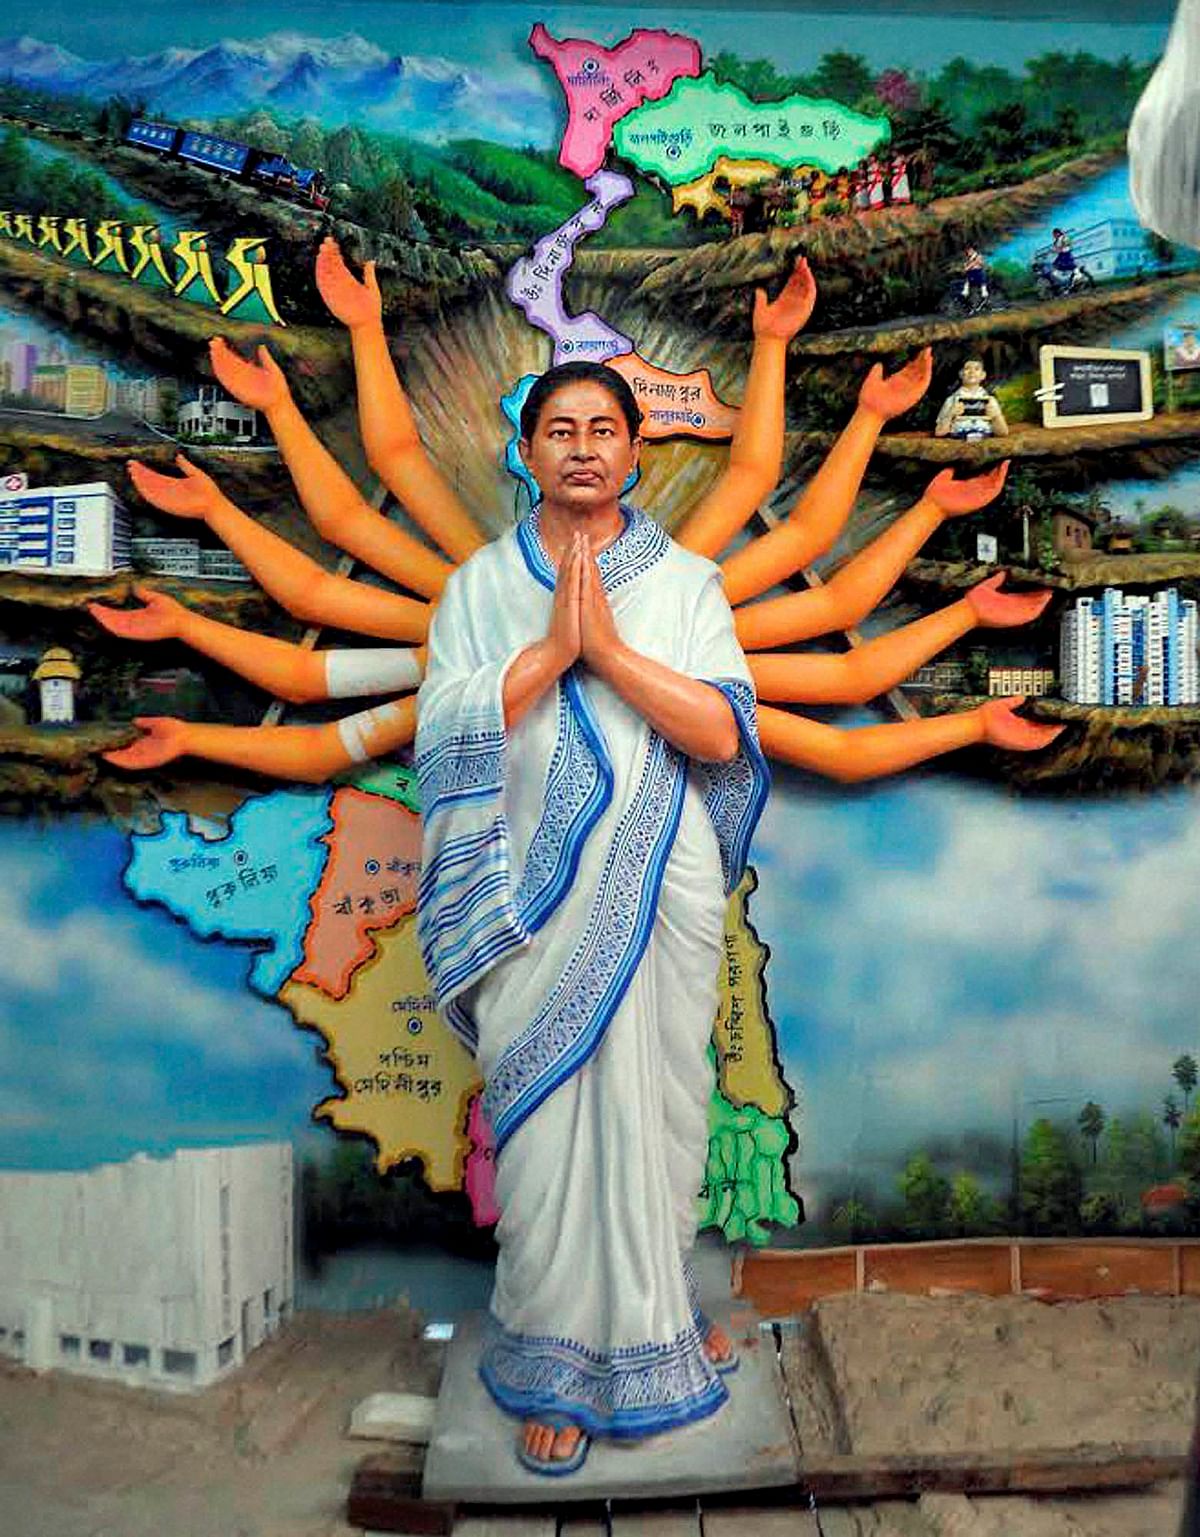 The idol is in Bengal’s Nadia district.